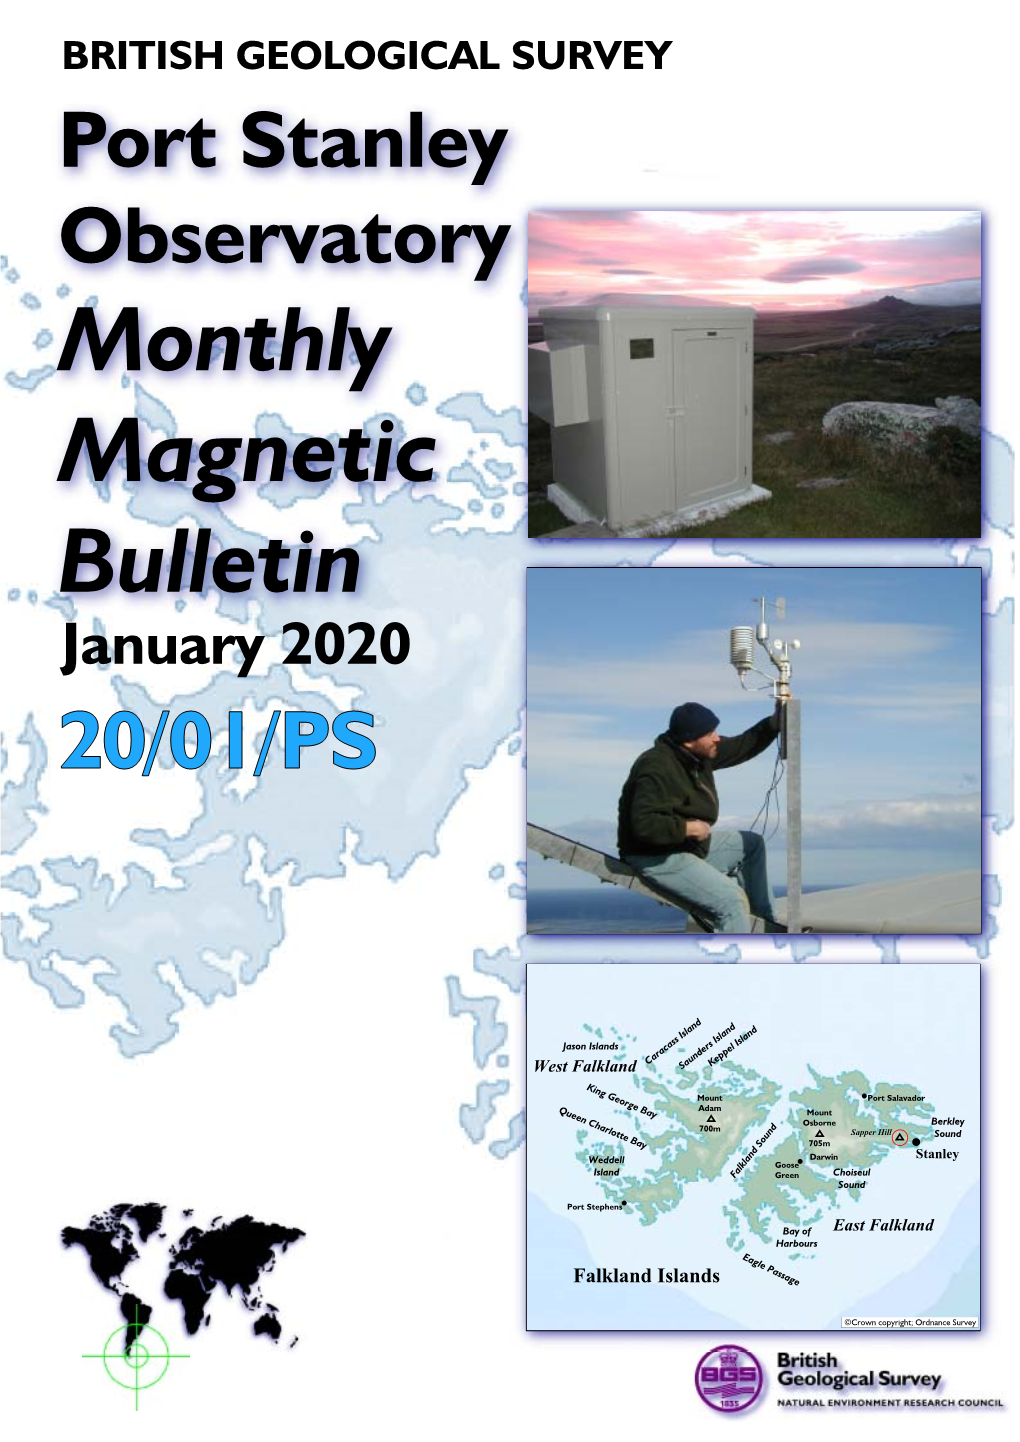 Port Stanley Observatory Monthly Magnetic Bulletin January 2020 20/01/PS